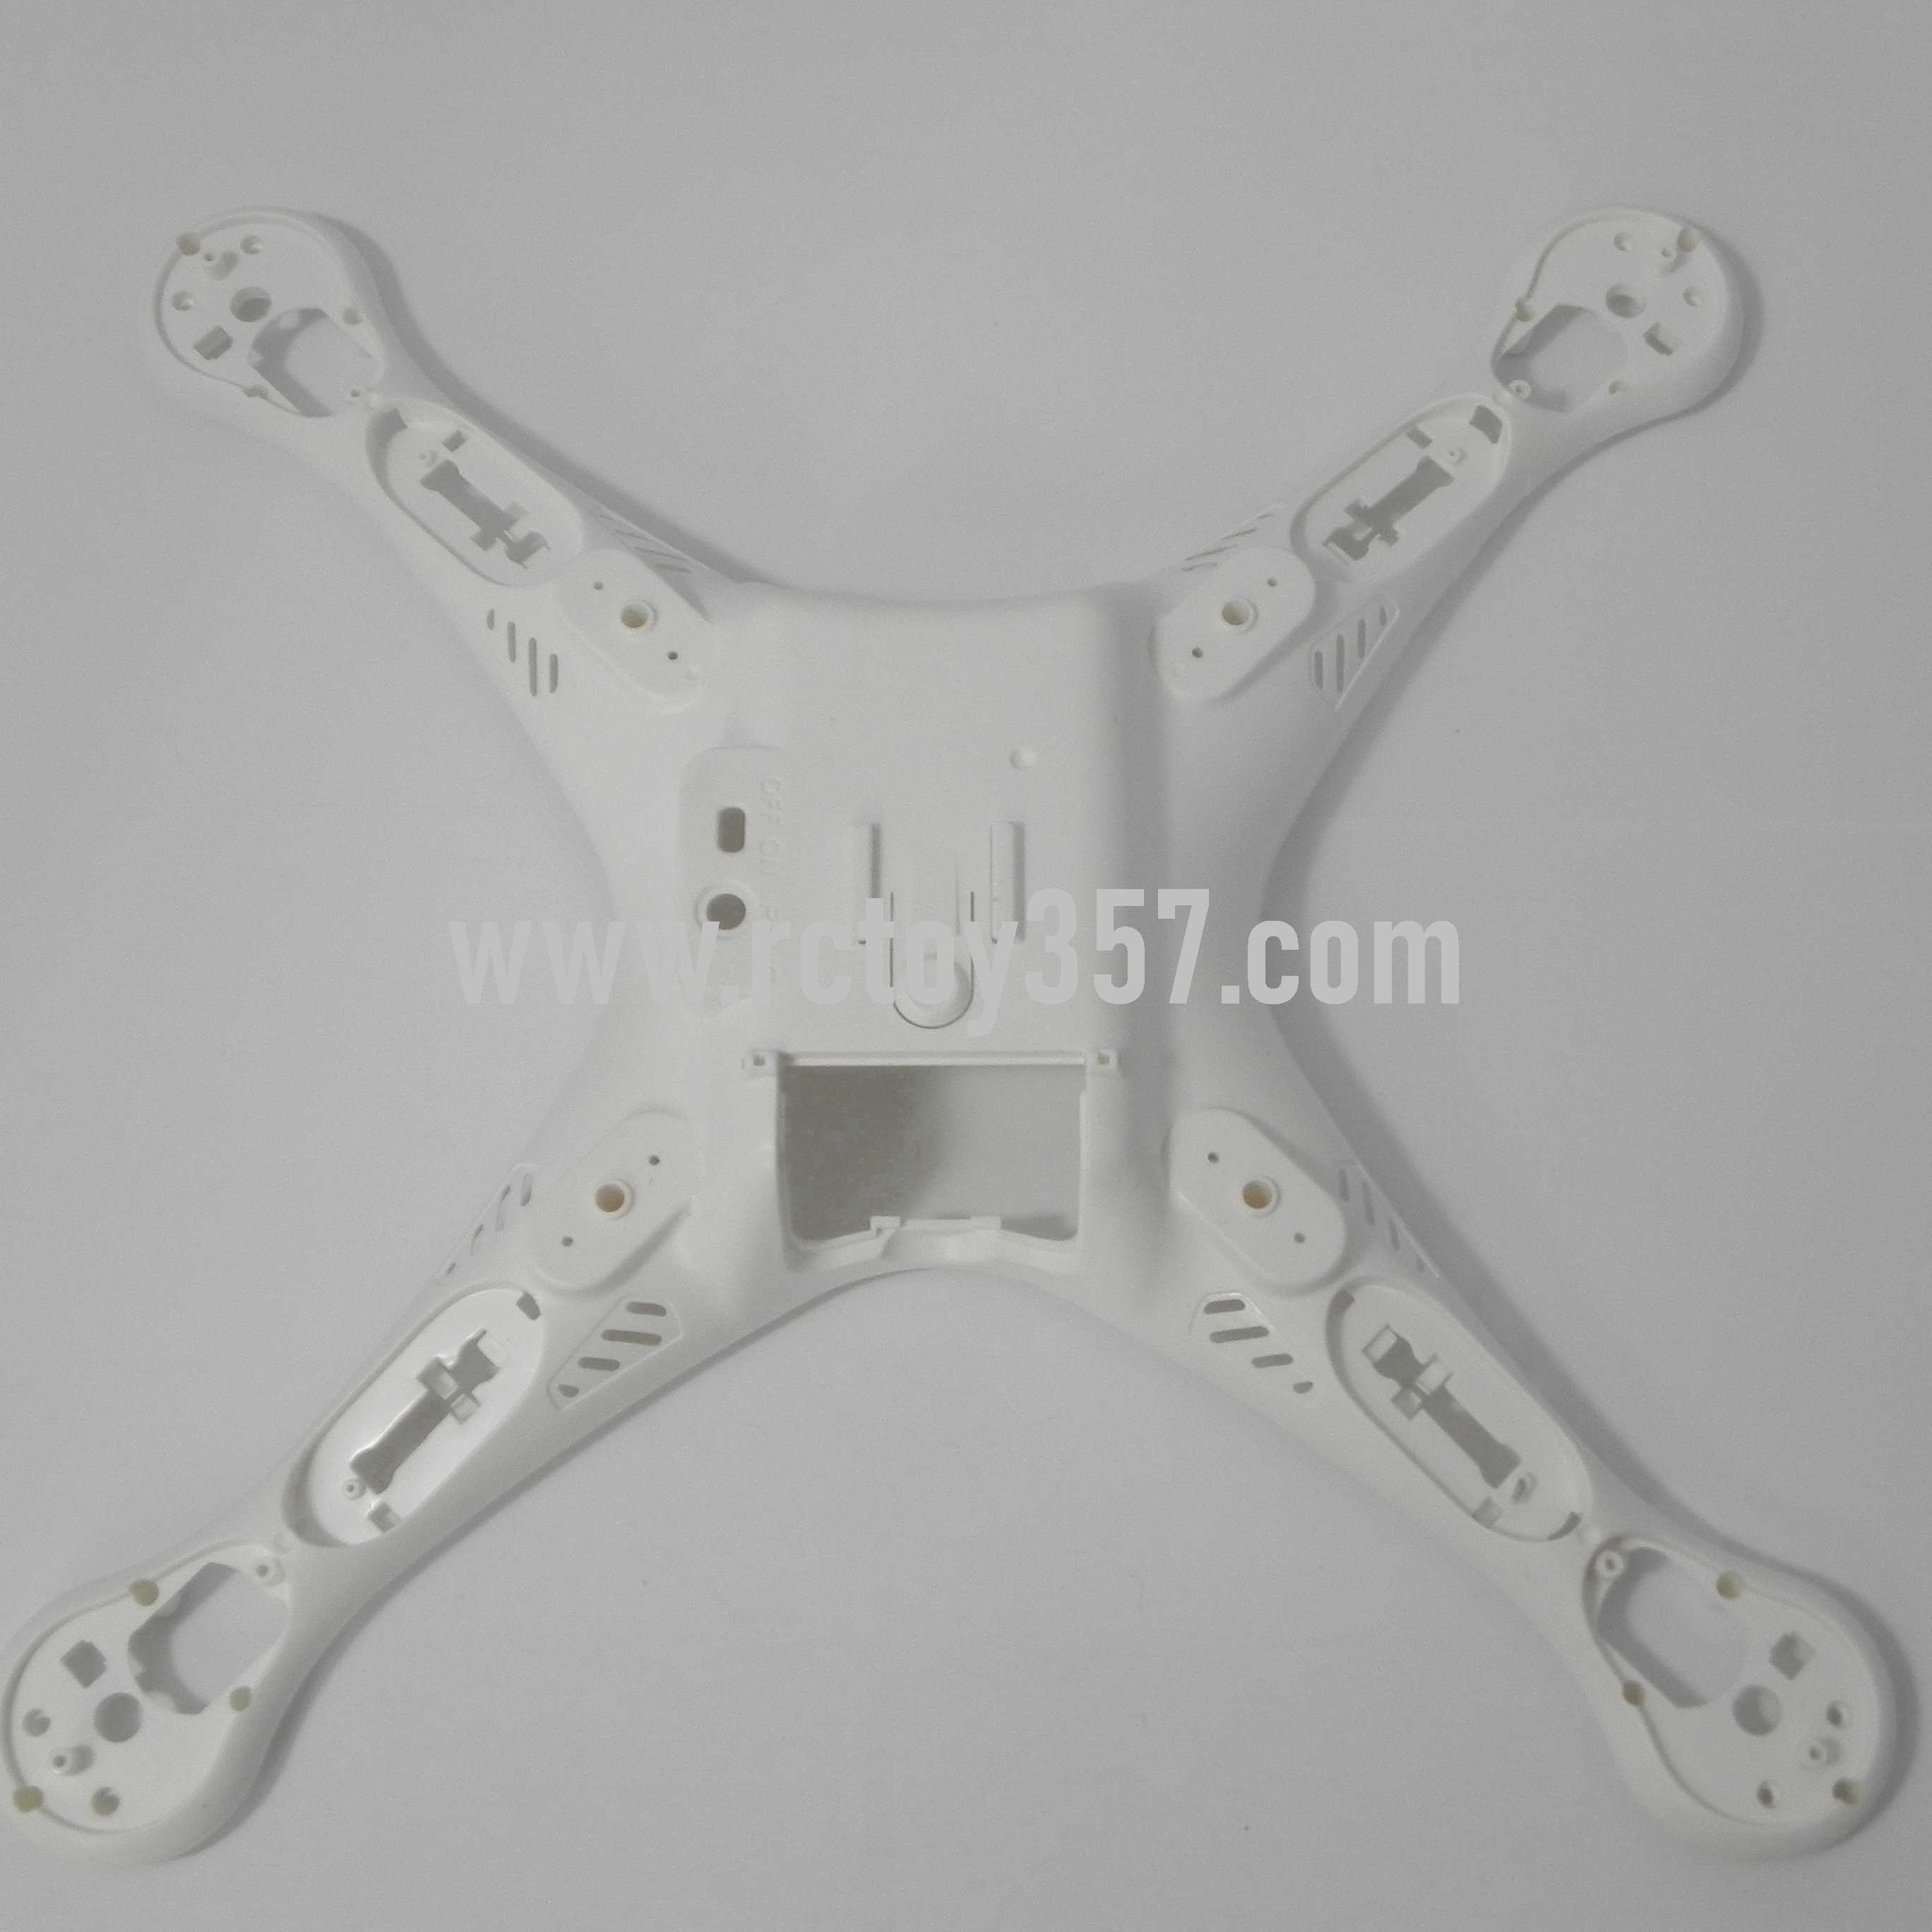 RCToy357.com - SYMA X8W Quadcopter toy Parts Lower board(white)